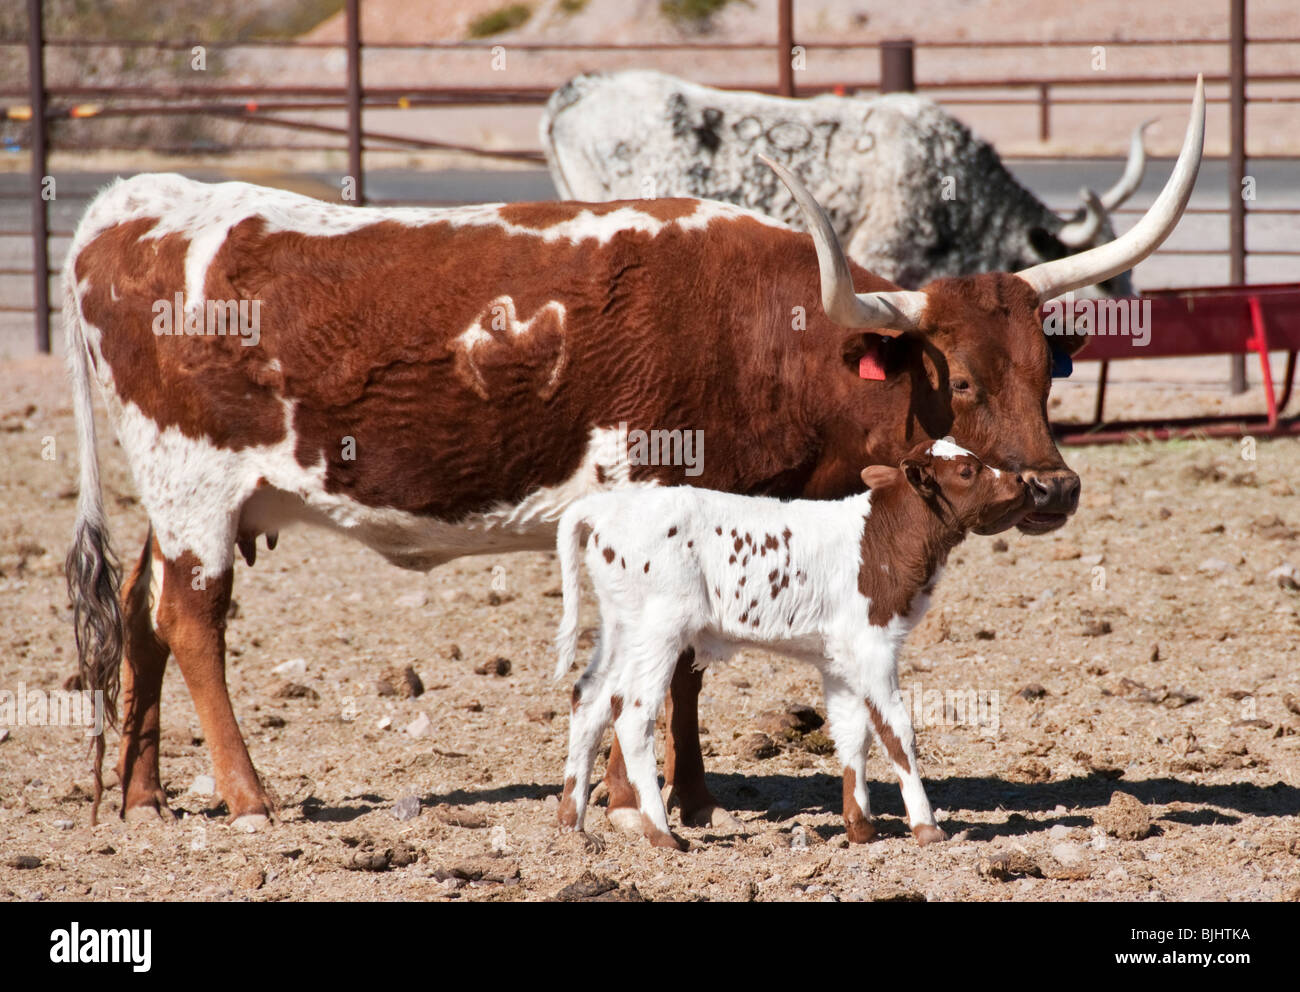 New Mexico, Las Cruces, New Mexico Farm & Ranch Heritage Museum, longhorn cattle cow licking calf Stock Photo